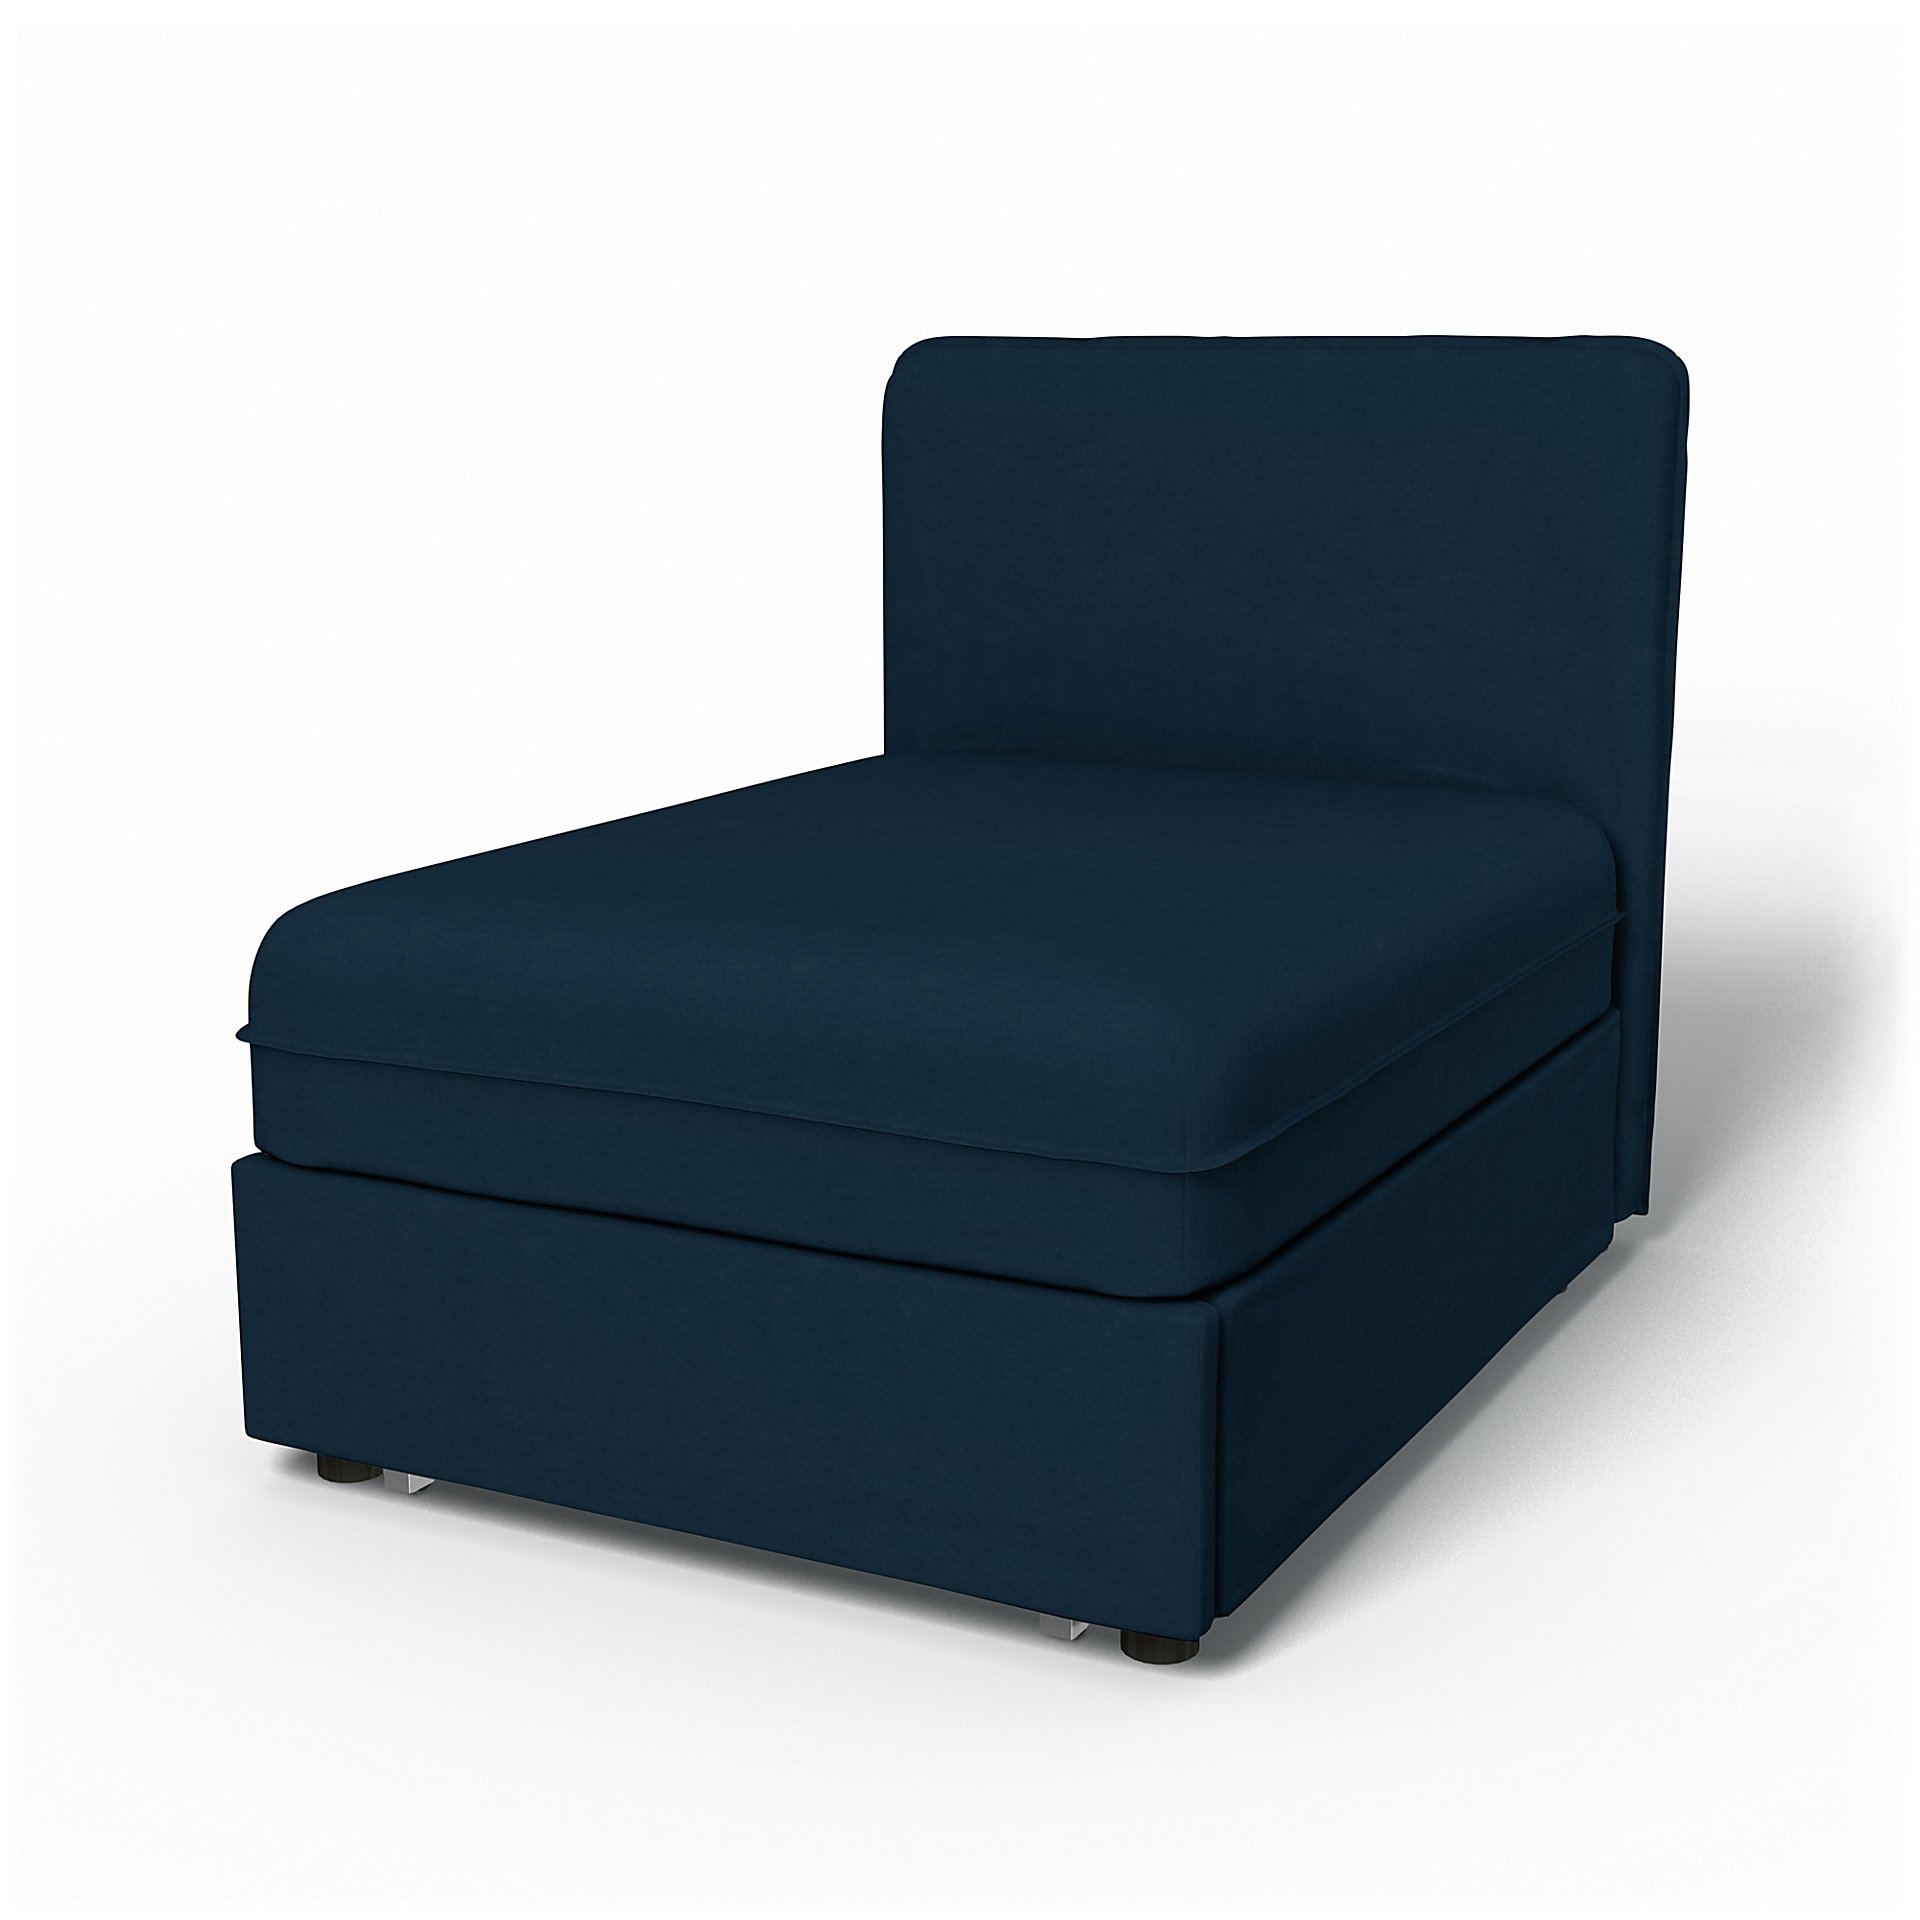 IKEA - Vallentuna Seat Module with Low Back Sofa Bed Cover 80x100 cm 32x39in, Midnight, Velvet - Bem